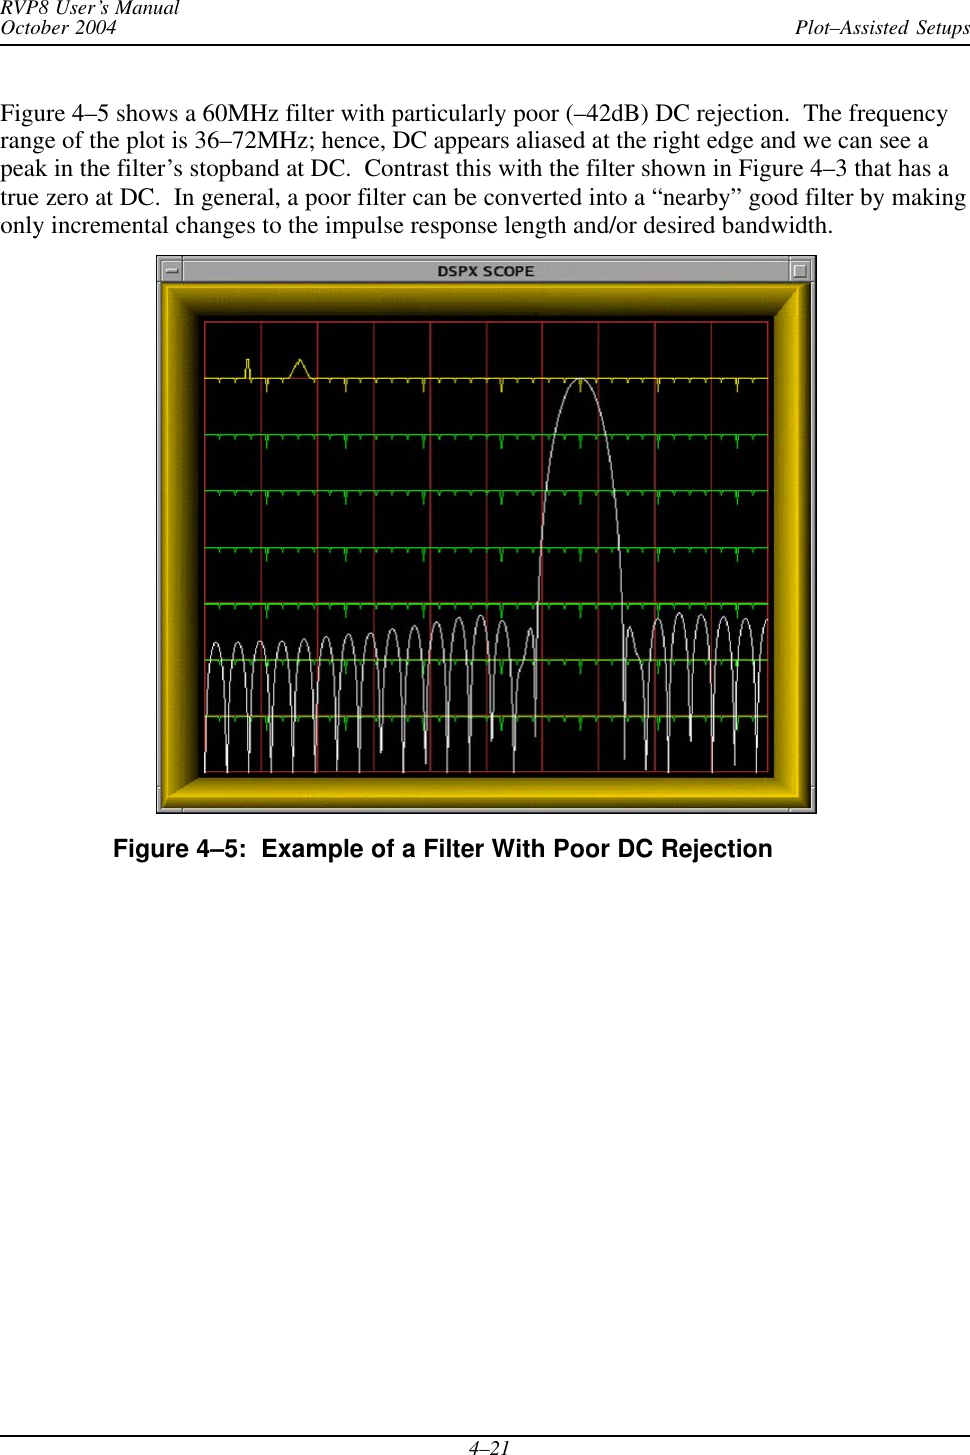 Plot–Assisted SetupsRVP8 User’s ManualOctober 20044–21Figure 4–5 shows a 60MHz filter with particularly poor (–42dB) DC rejection.  The frequencyrange of the plot is 36–72MHz; hence, DC appears aliased at the right edge and we can see apeak in the filter’s stopband at DC.  Contrast this with the filter shown in Figure 4–3 that has atrue zero at DC.  In general, a poor filter can be converted into a “nearby” good filter by makingonly incremental changes to the impulse response length and/or desired bandwidth.Figure 4–5:  Example of a Filter With Poor DC Rejection